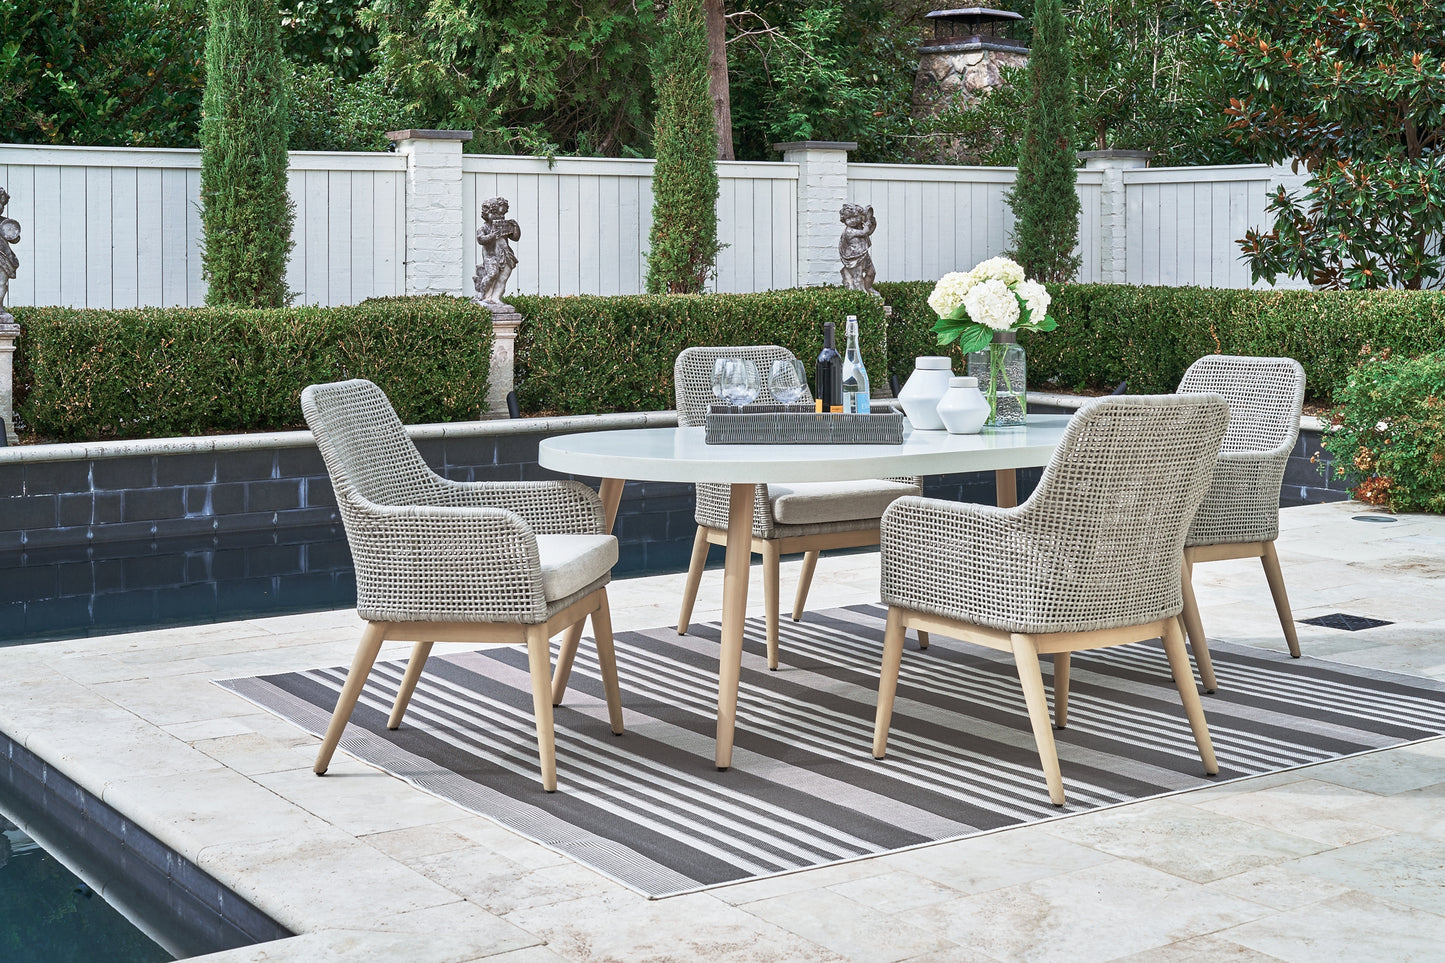 Seton Creek Outdoor Dining Table and 4 Chairs